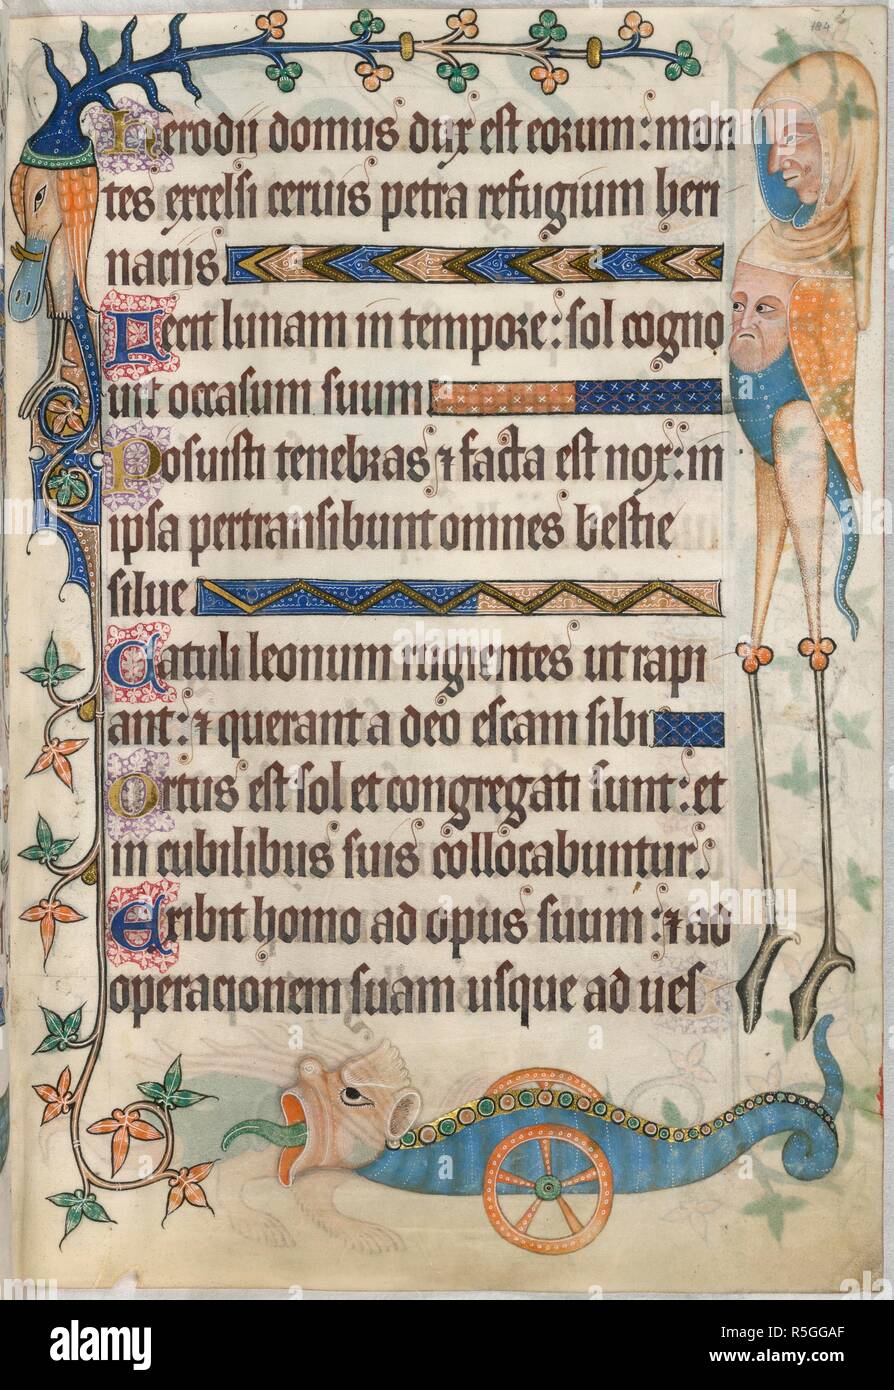 Psalm 103; grotesques. Luttrell Psalter. England [East Anglia]; circa 1325-1335. [Whole folio] Psalm 103. Marginal decoration with three grotesques; at the top, a grotesque with bird's bill and tusks. Right, a monster with two human heads and long legs. Lower margin; a wingless and legless dragon running on two vermillion wheels.  Image taken from Luttrell Psalter.  Originally published/produced in England [East Anglia]; circa 1325-1335. . Source: Add. 42130, f.184. Language: Latin. Stock Photo